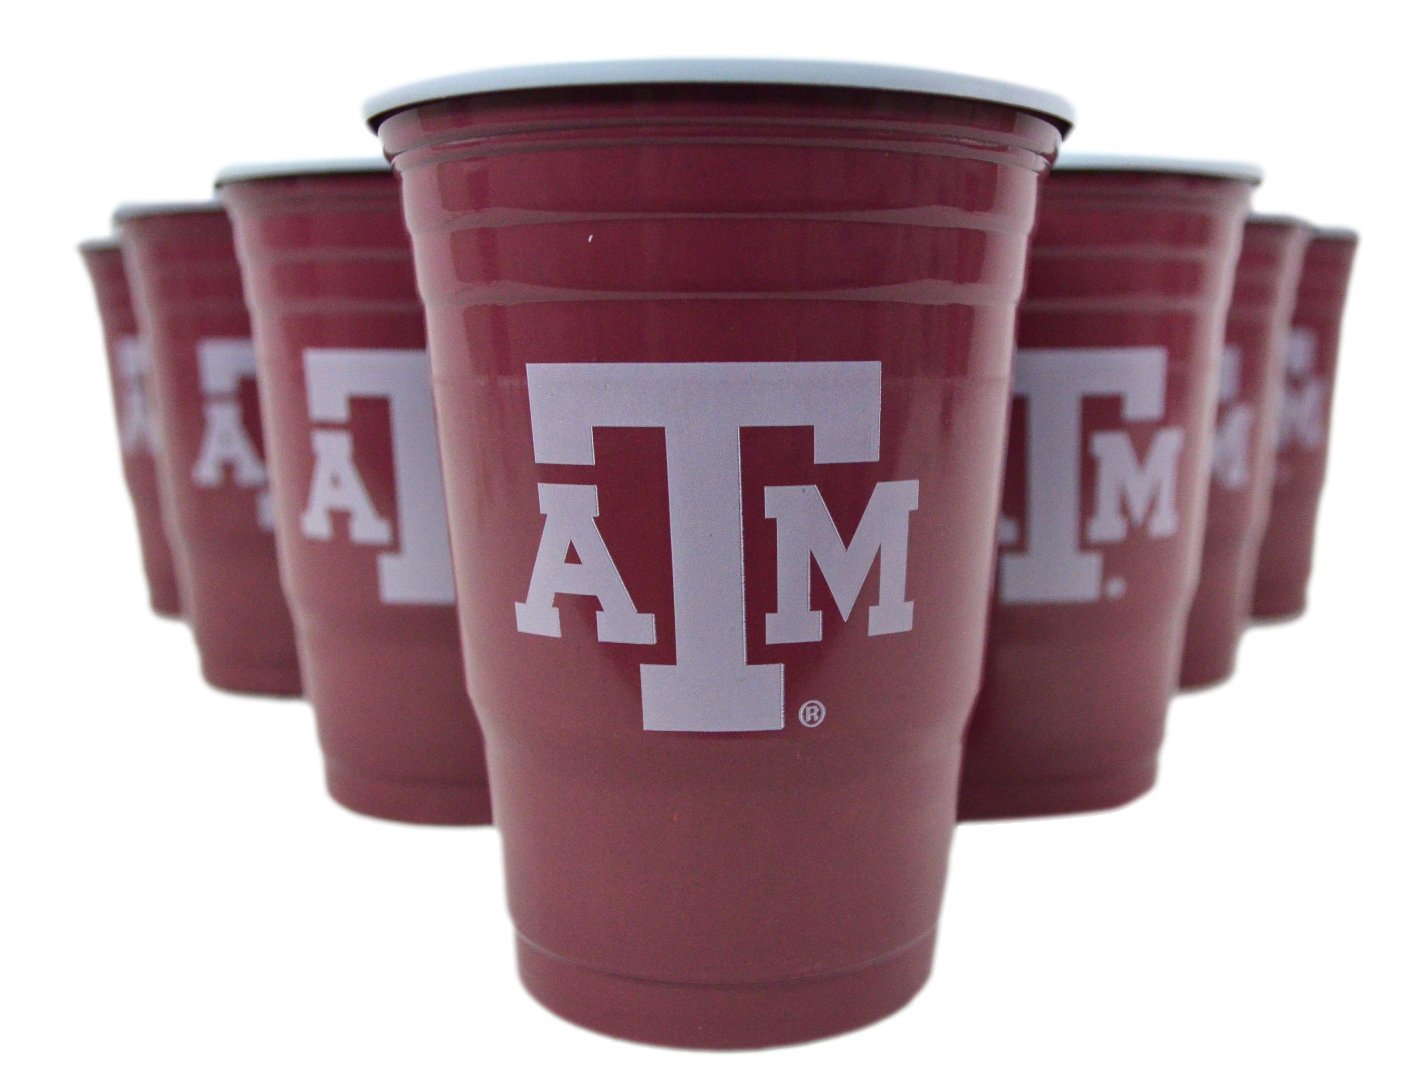 NCAA Fan Shop Beer Pong Set. Rep Your School, Alma Mater or Favorite Team with The Classic Game of College Beer Pong - Comes with 22 Cups and 6 Ping Pong Balls